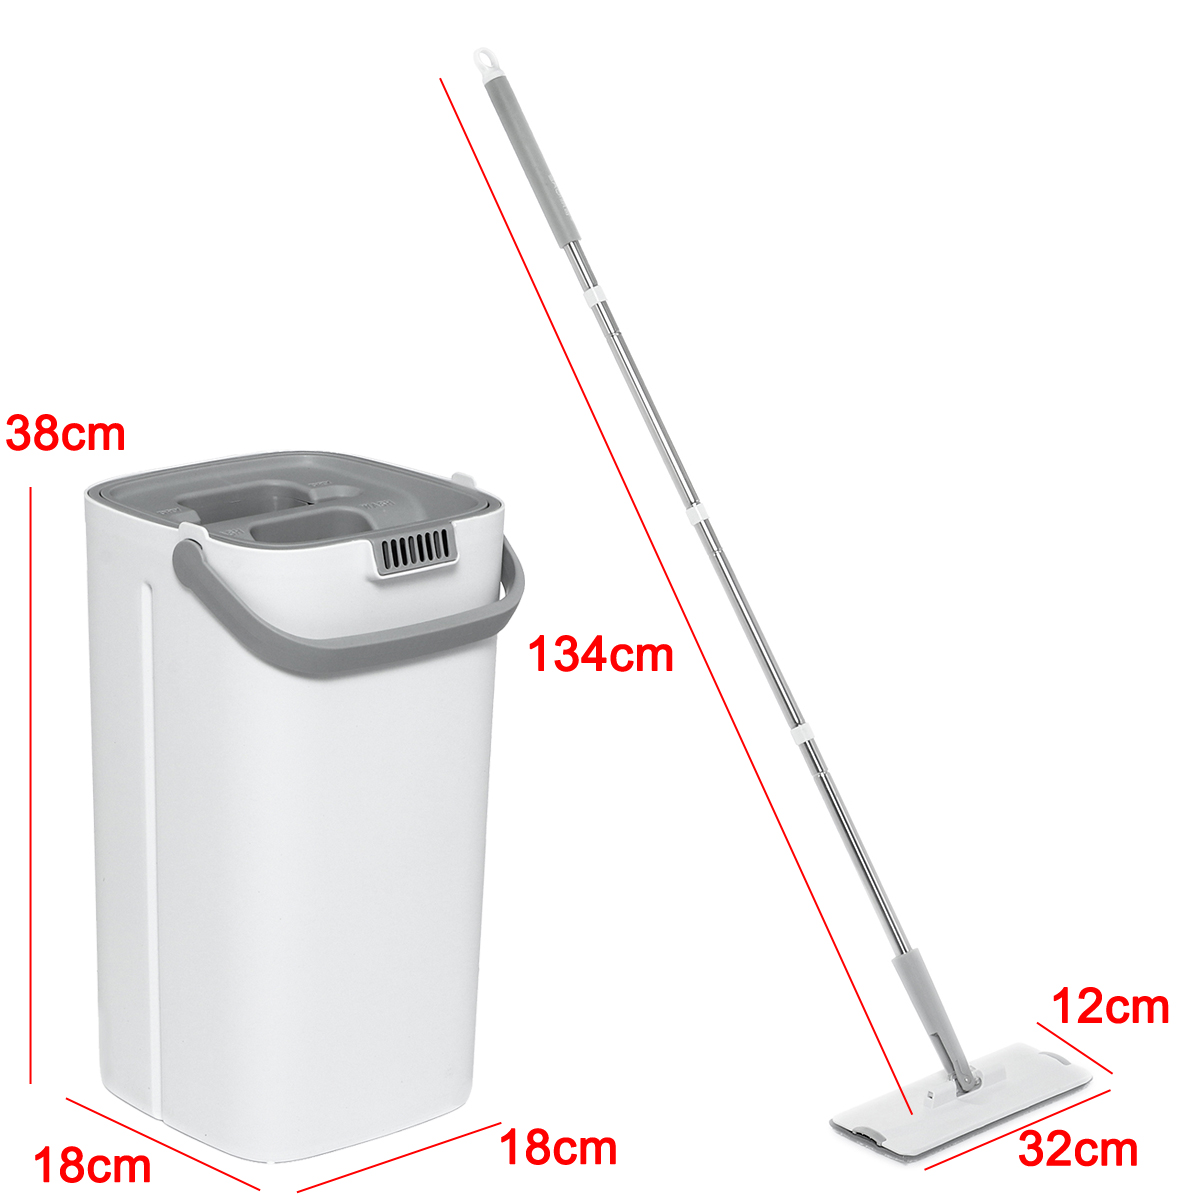 Dry-Wet-Automatic-Spin-Mop-Floor-Cleaner-Washing-Fiber-Hand-Cleaning-Dust-Fast-1588119-2